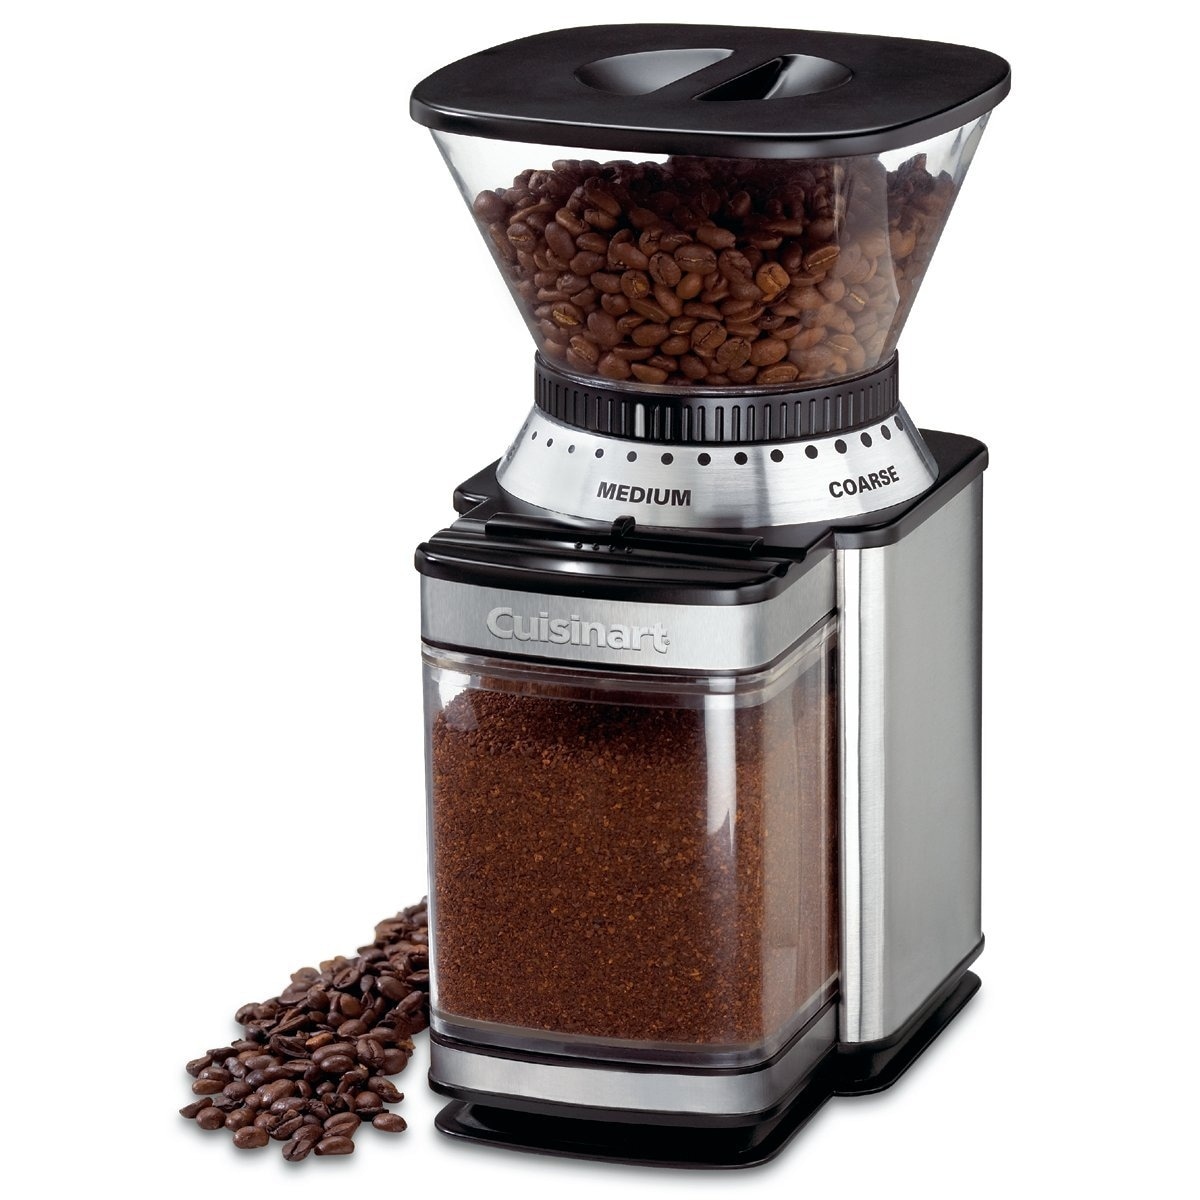 https://ak1.ostkcdn.com/images/products/is/images/direct/f22c23fb9aa696c4f2e429721c033e125122abbc/Cuisinart-DBM-8-Supreme-Grind-Automatic-Burr-Mill%2CStainless.jpg